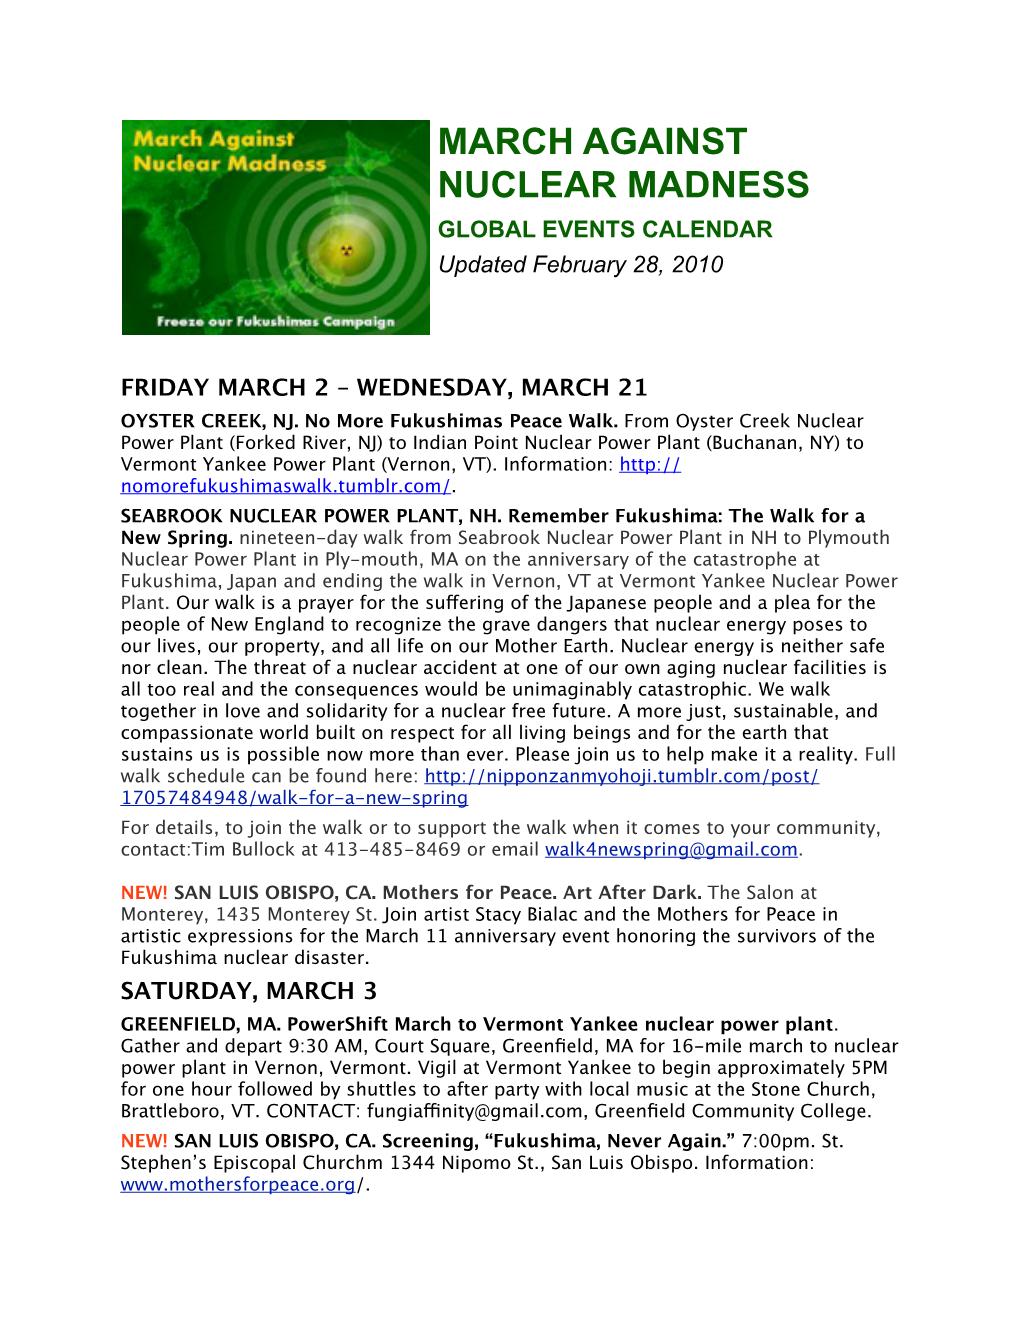 MARCH AGAINST NUCLEAR MADNESS GLOBAL EVENTS CALENDAR Updated February 28, 2010